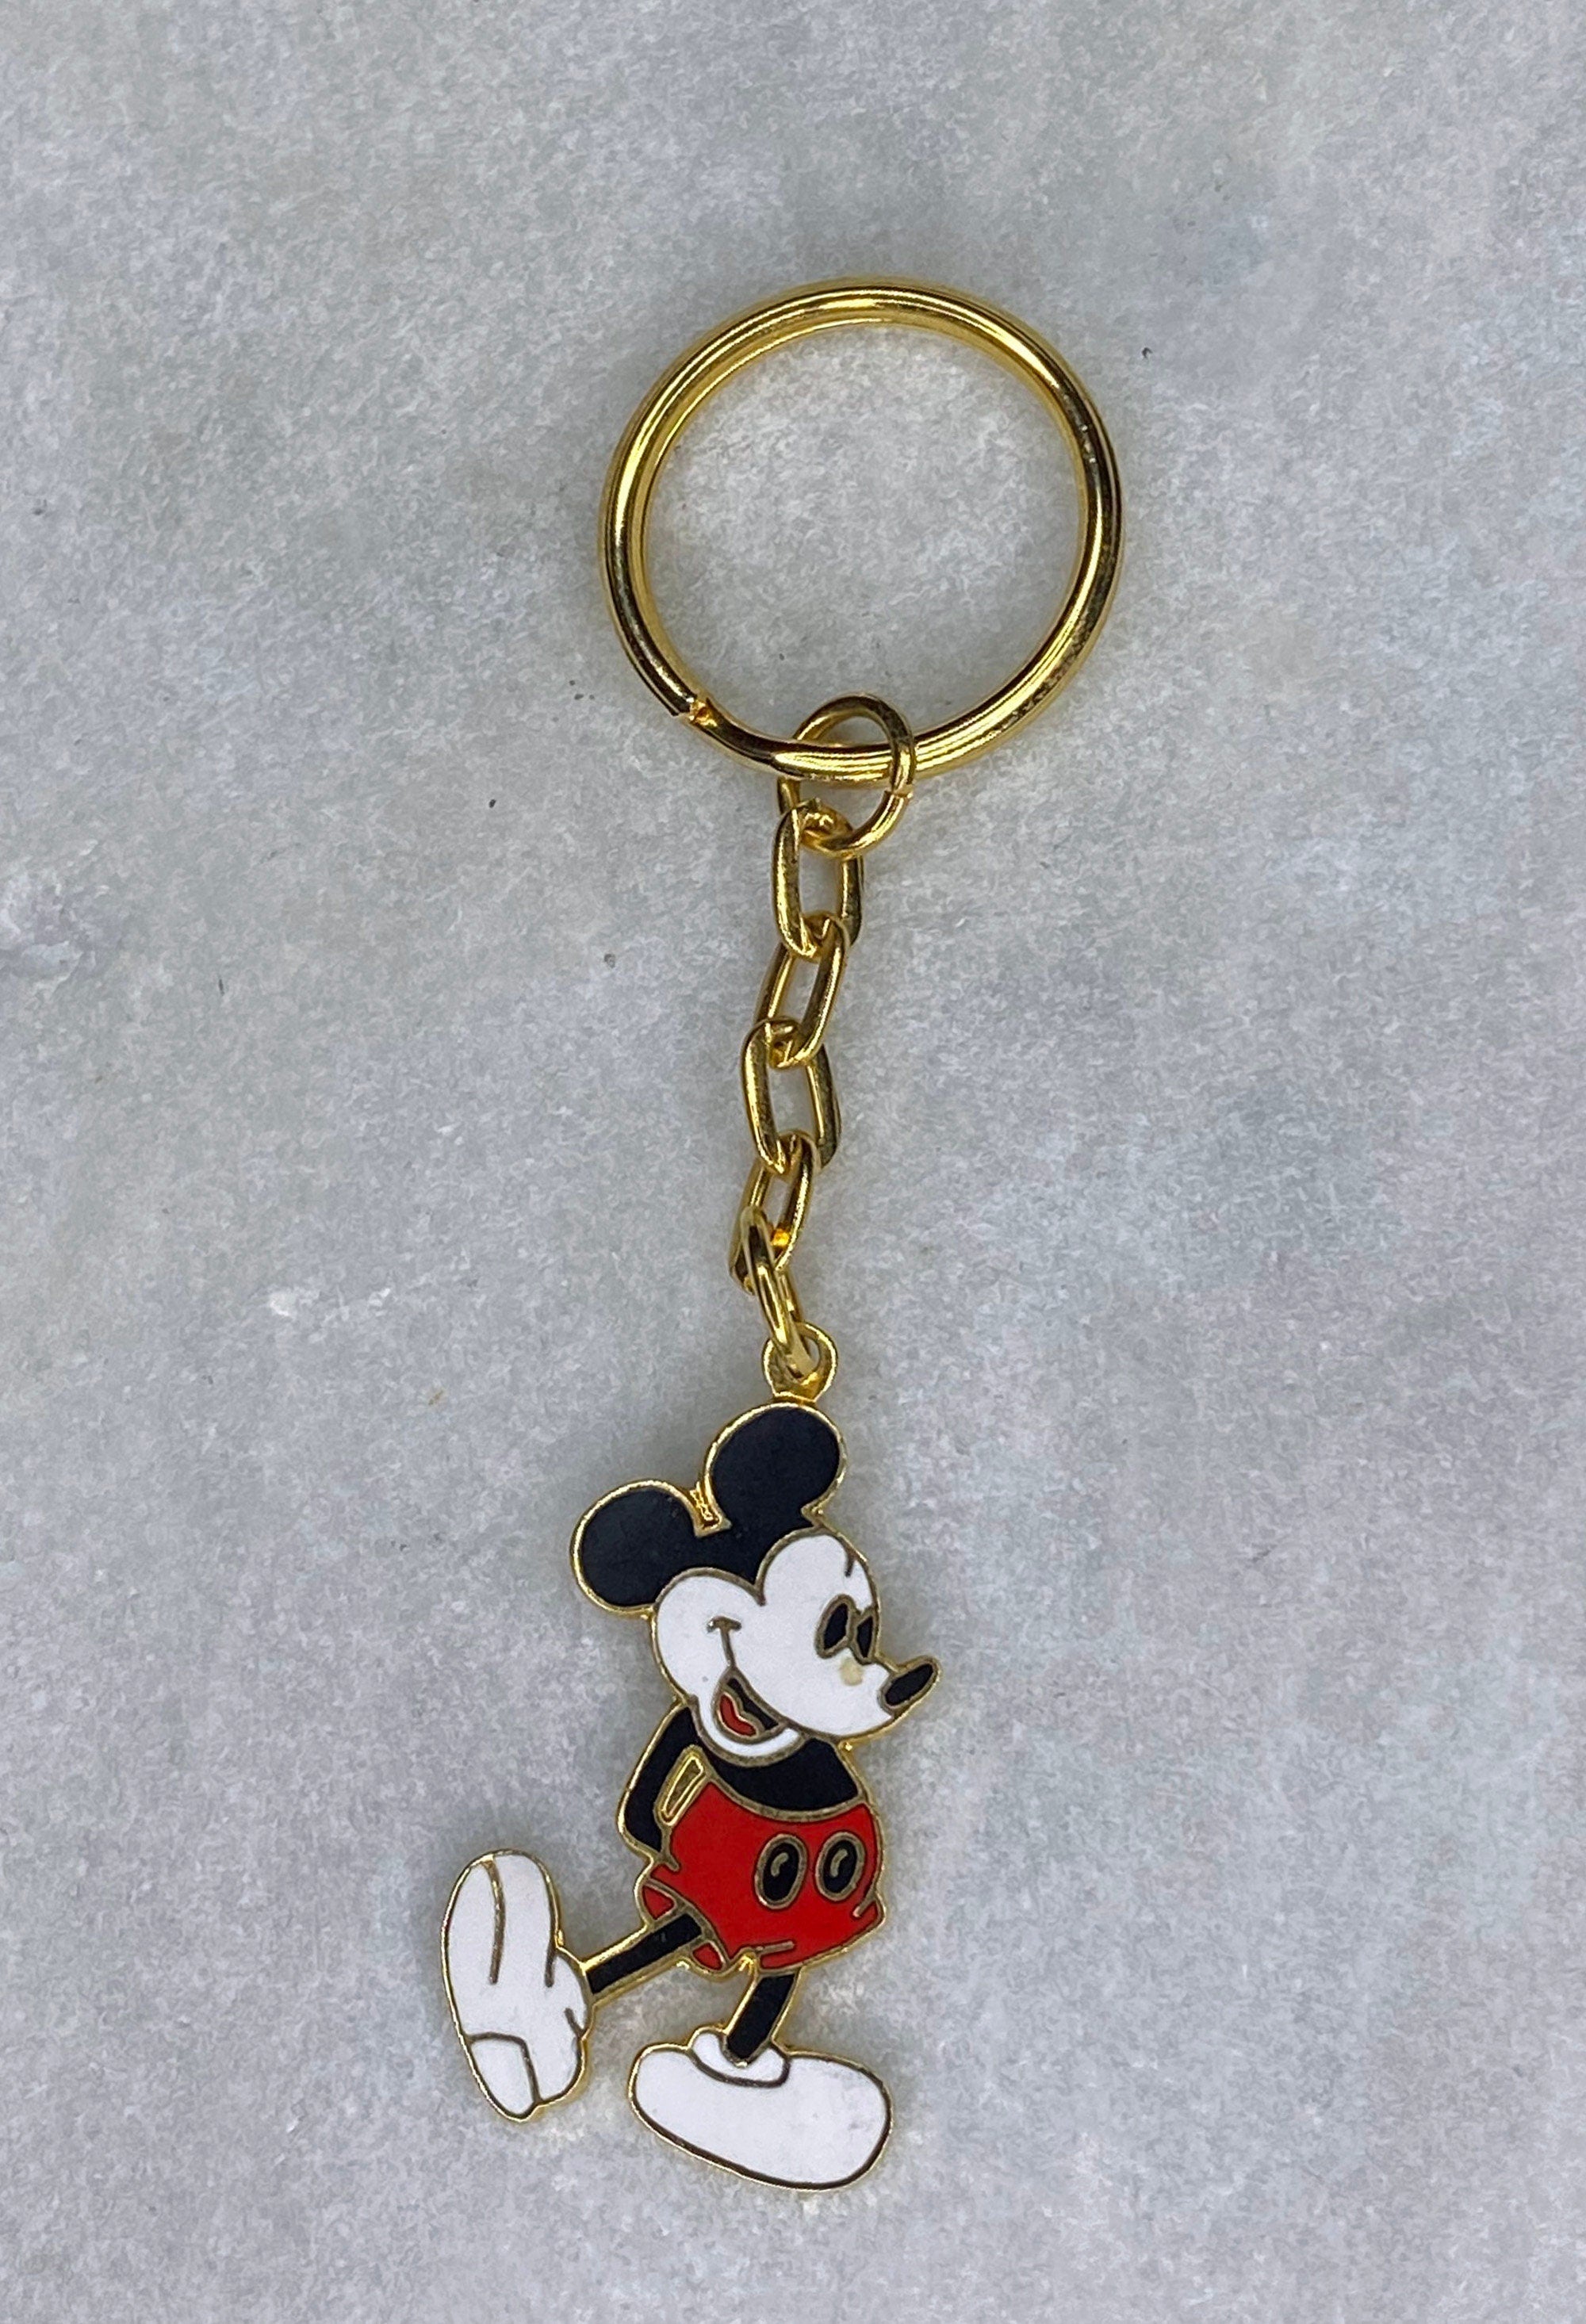 Vintage 80s Mickey Mouse Key Chain Enamel Over Gold Tone Metal by